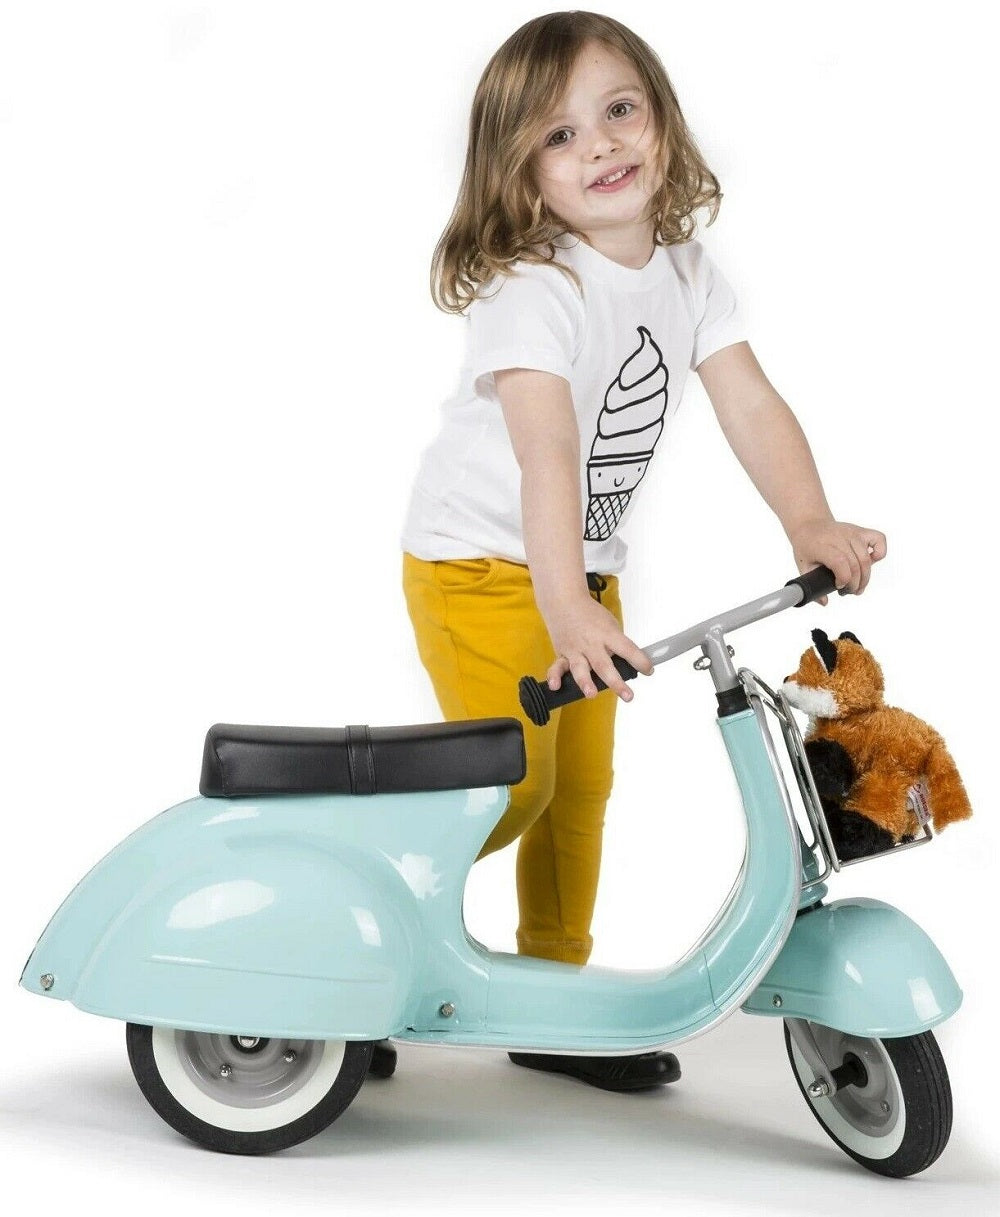 Kids Ride On Scooter - Mint